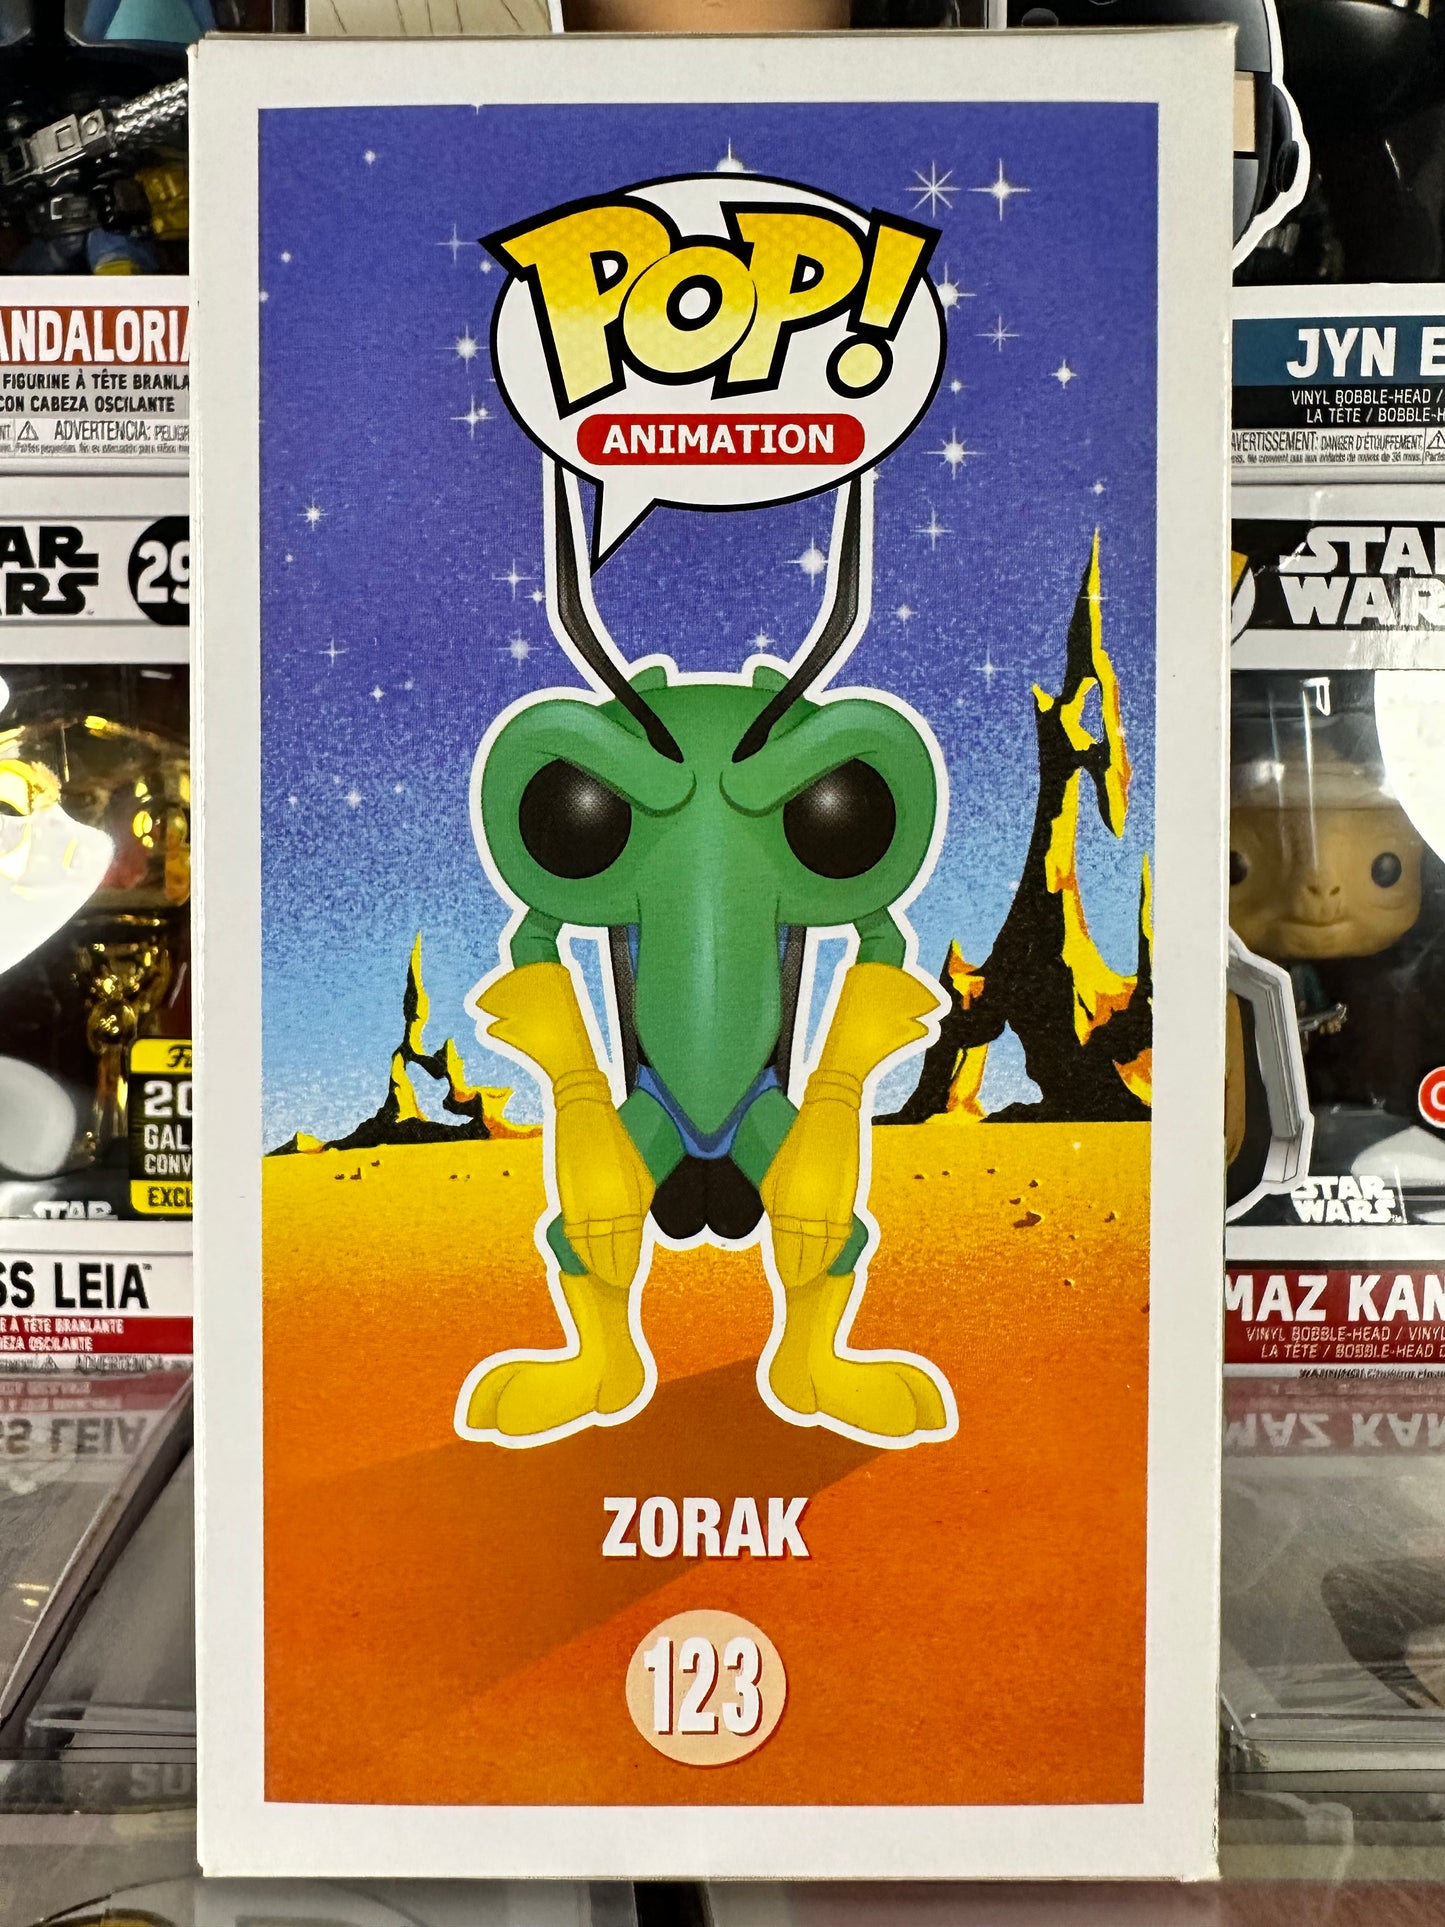 Space Ghost - Zorak (123) (2016 Summer Convention Exclusive) Vaulted